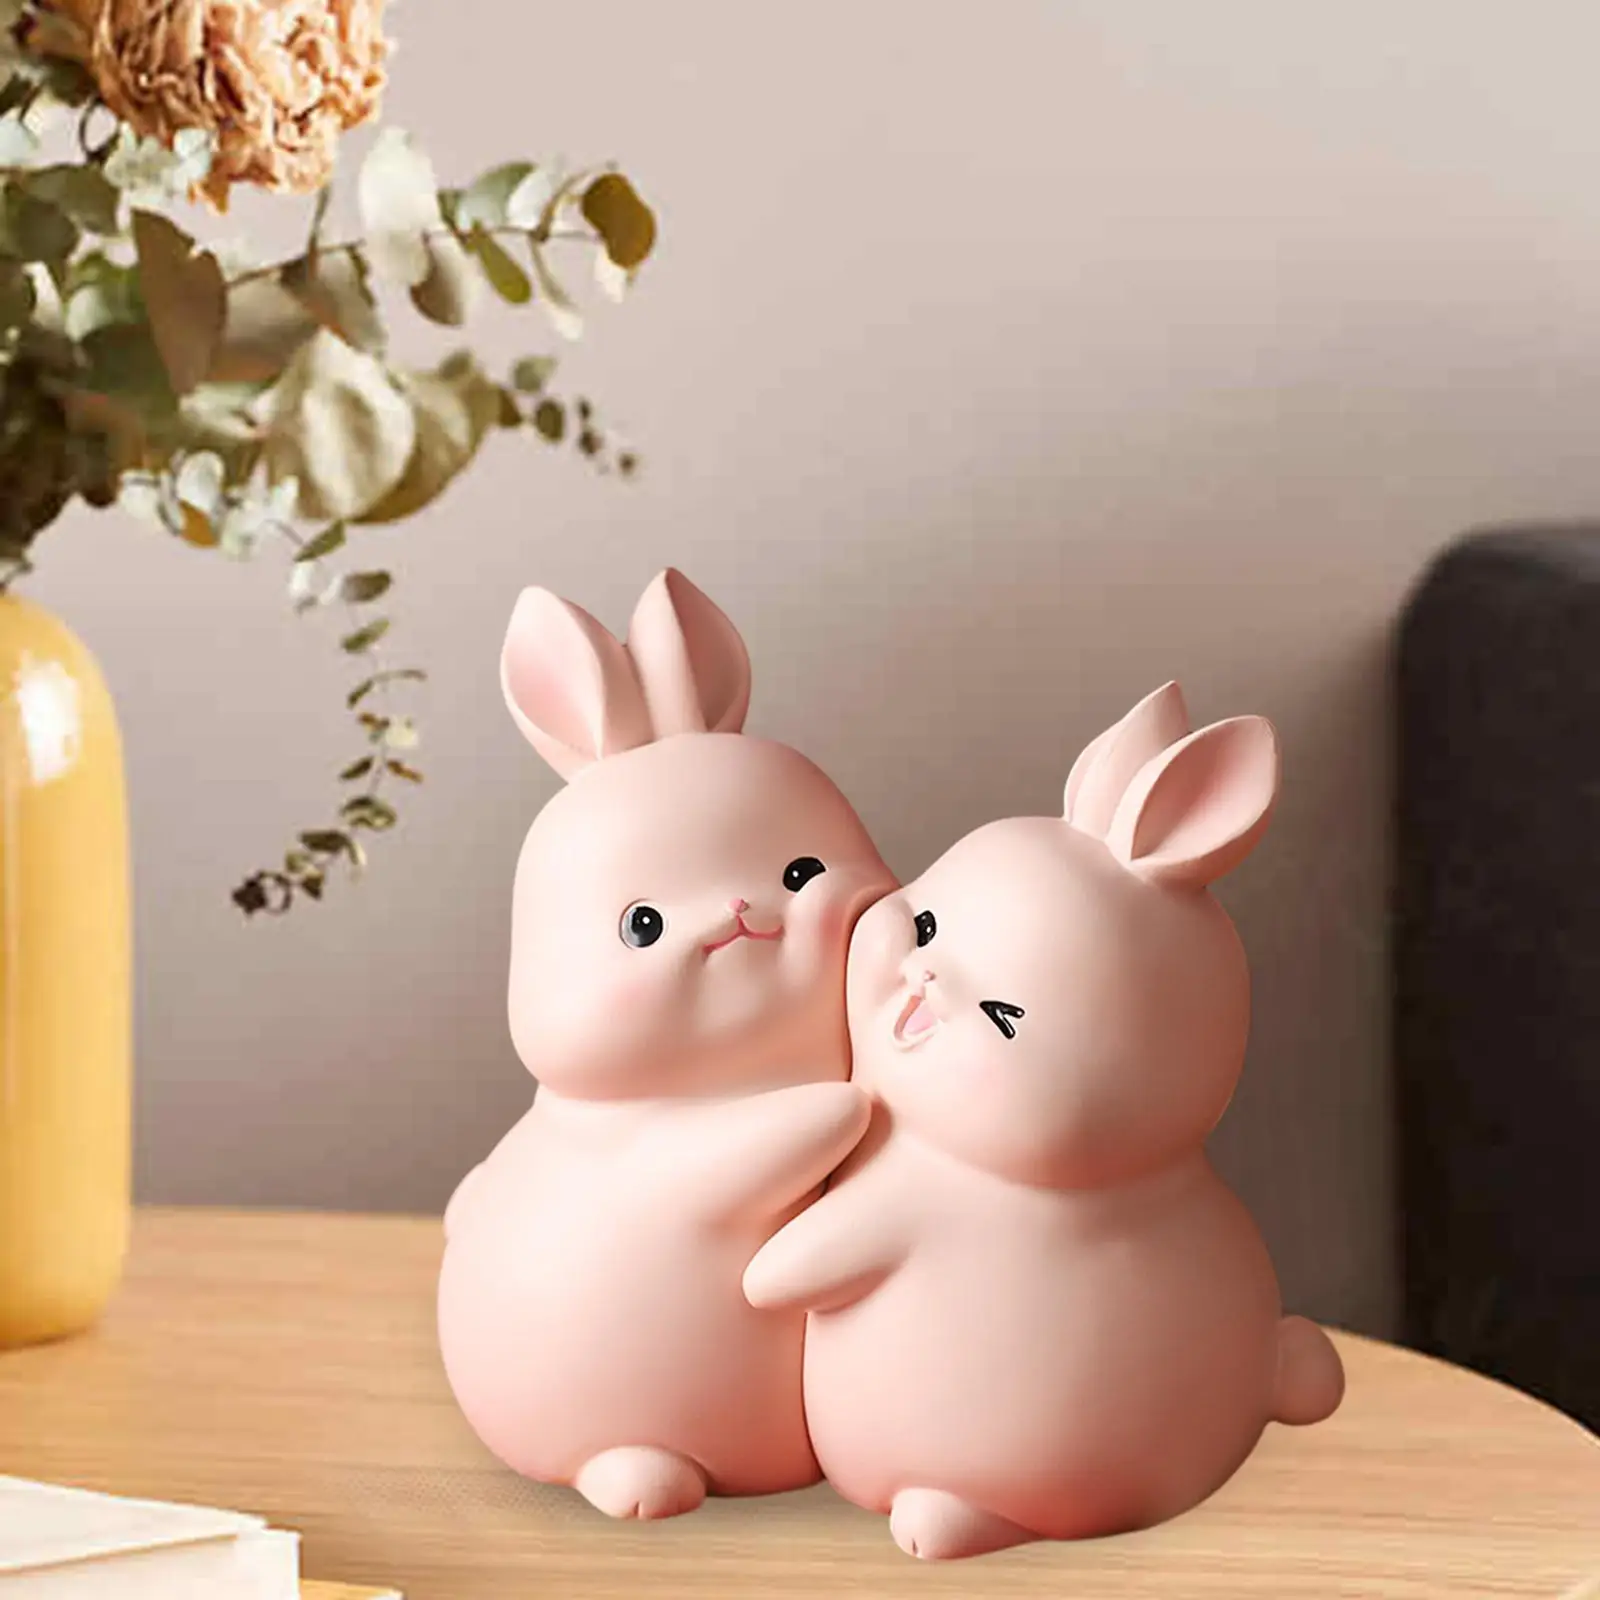 Rabbit Bookends Lovely Resin Animal Figurines Book Organizer Support Book Ends to Hold Books for Shelves Home Cabinet Desk Decor